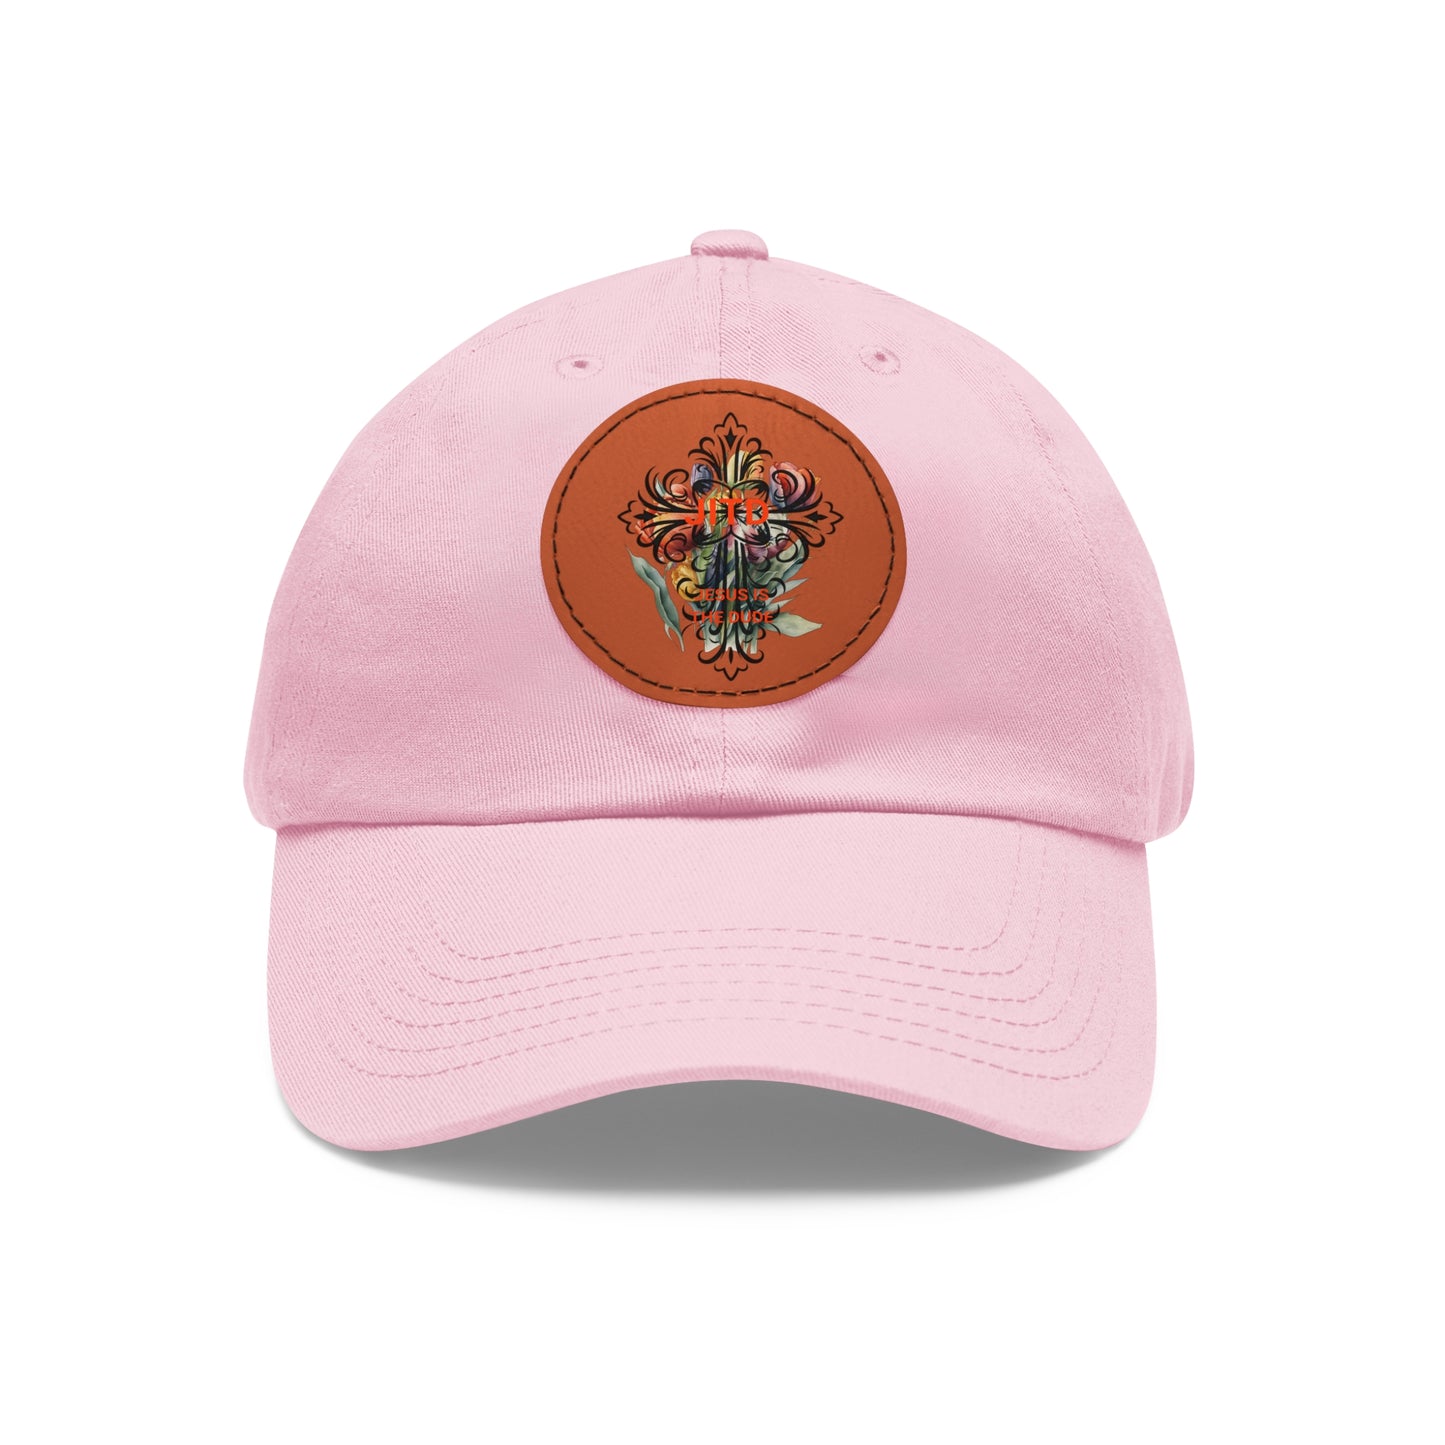 JITD BOUQUET CROSS HAT WITH LEATHER PATCH